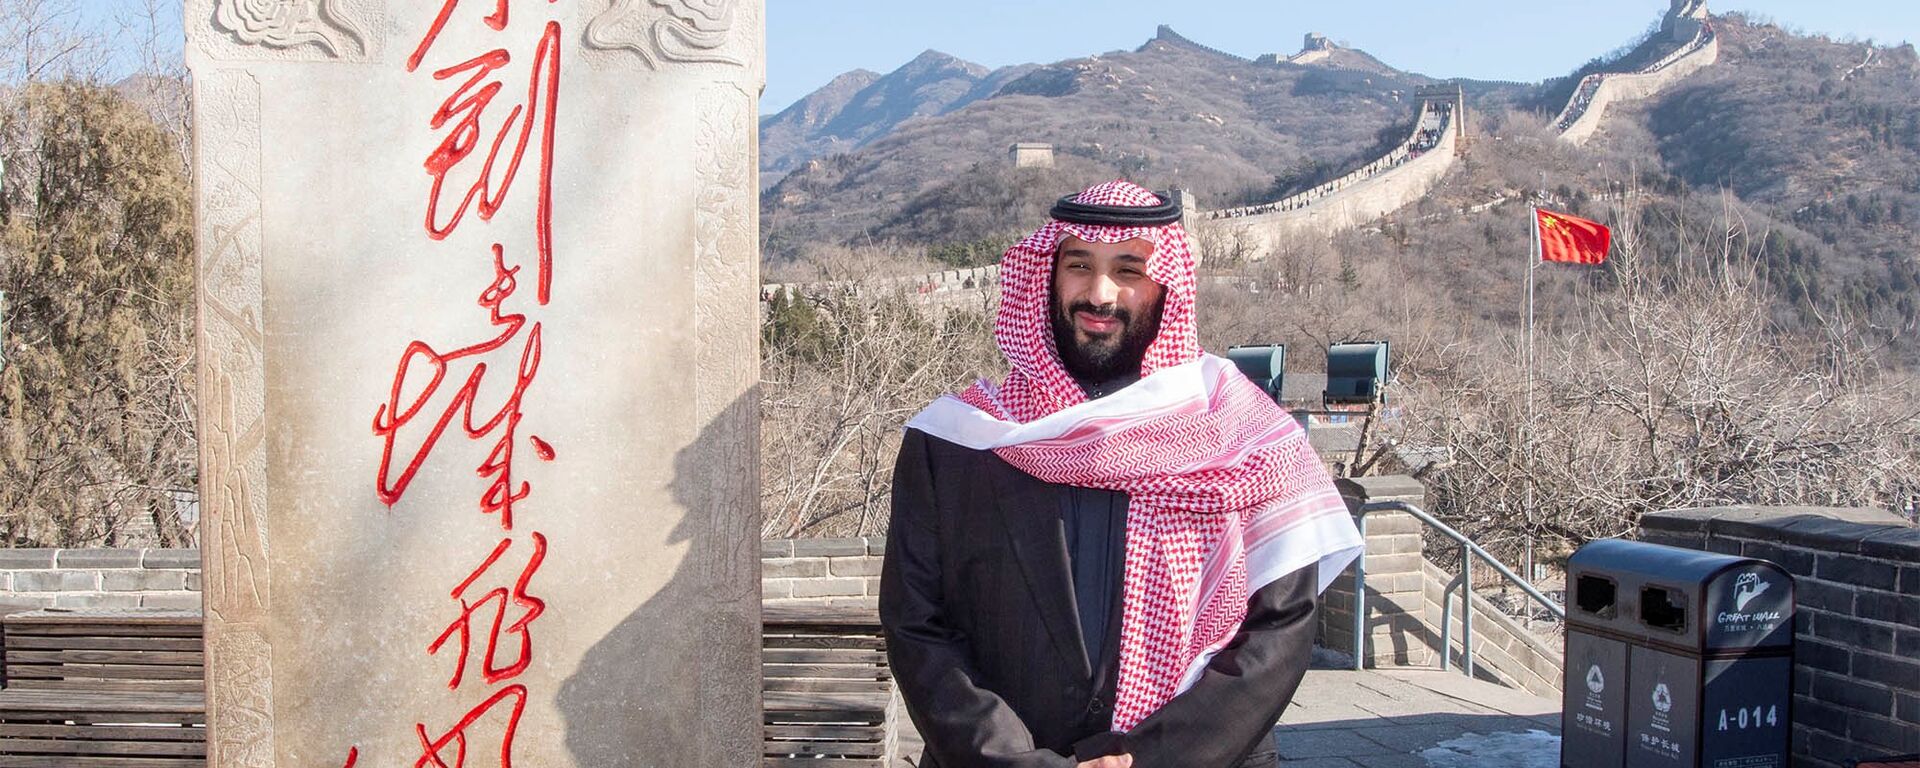 Saudi Arabia's Crown Prince Mohammed bin Salman poses for camera during his visit to Great Wall of China in Beijing, China February 21, 2019 - Sputnik International, 1920, 22.02.2019